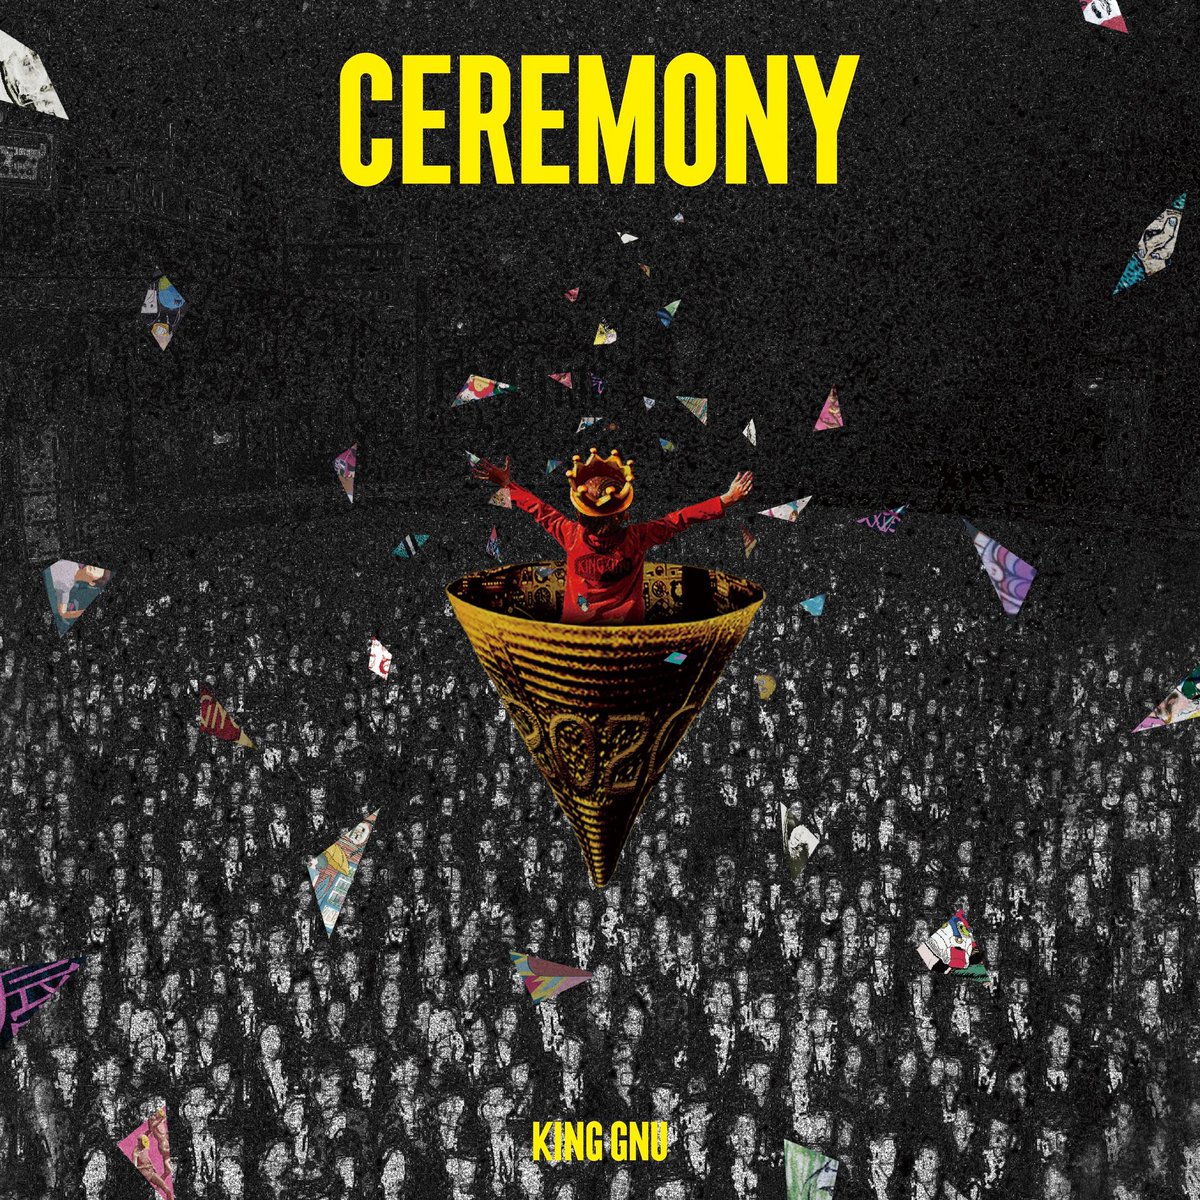 Cover art for『King Gnu - Doron』from the release『CEREMONY』